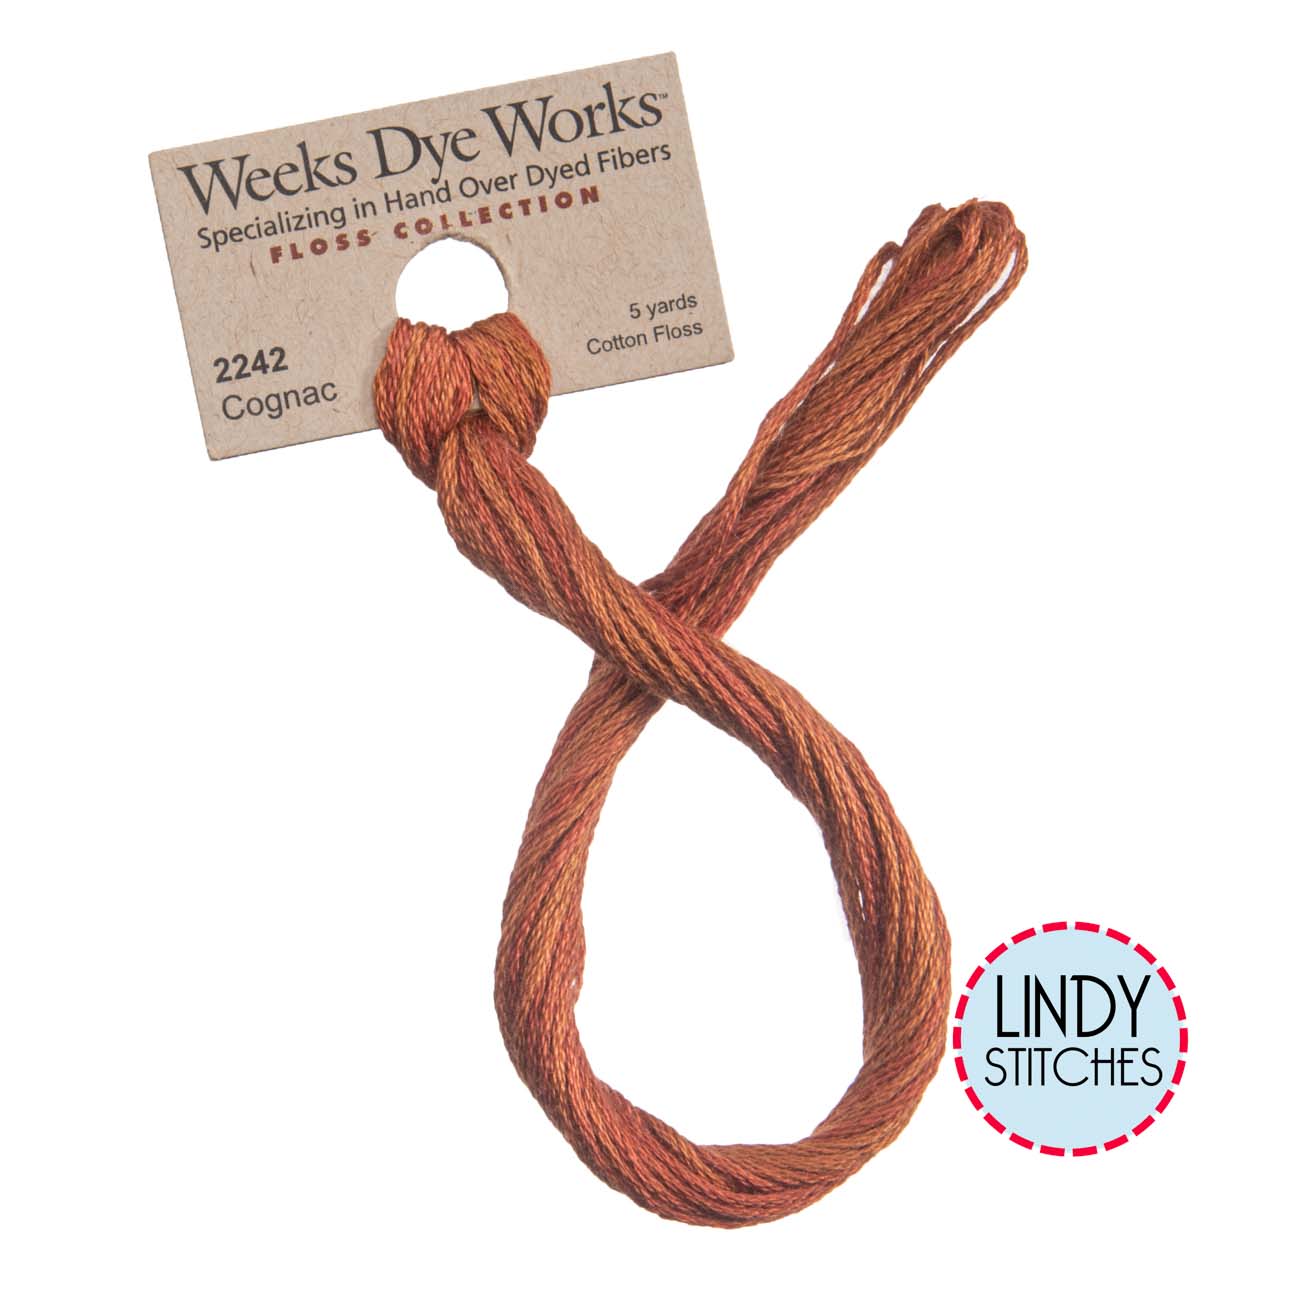 Cognac Weeks Dye Works Floss Hand Dyed Cotton Skein 2242